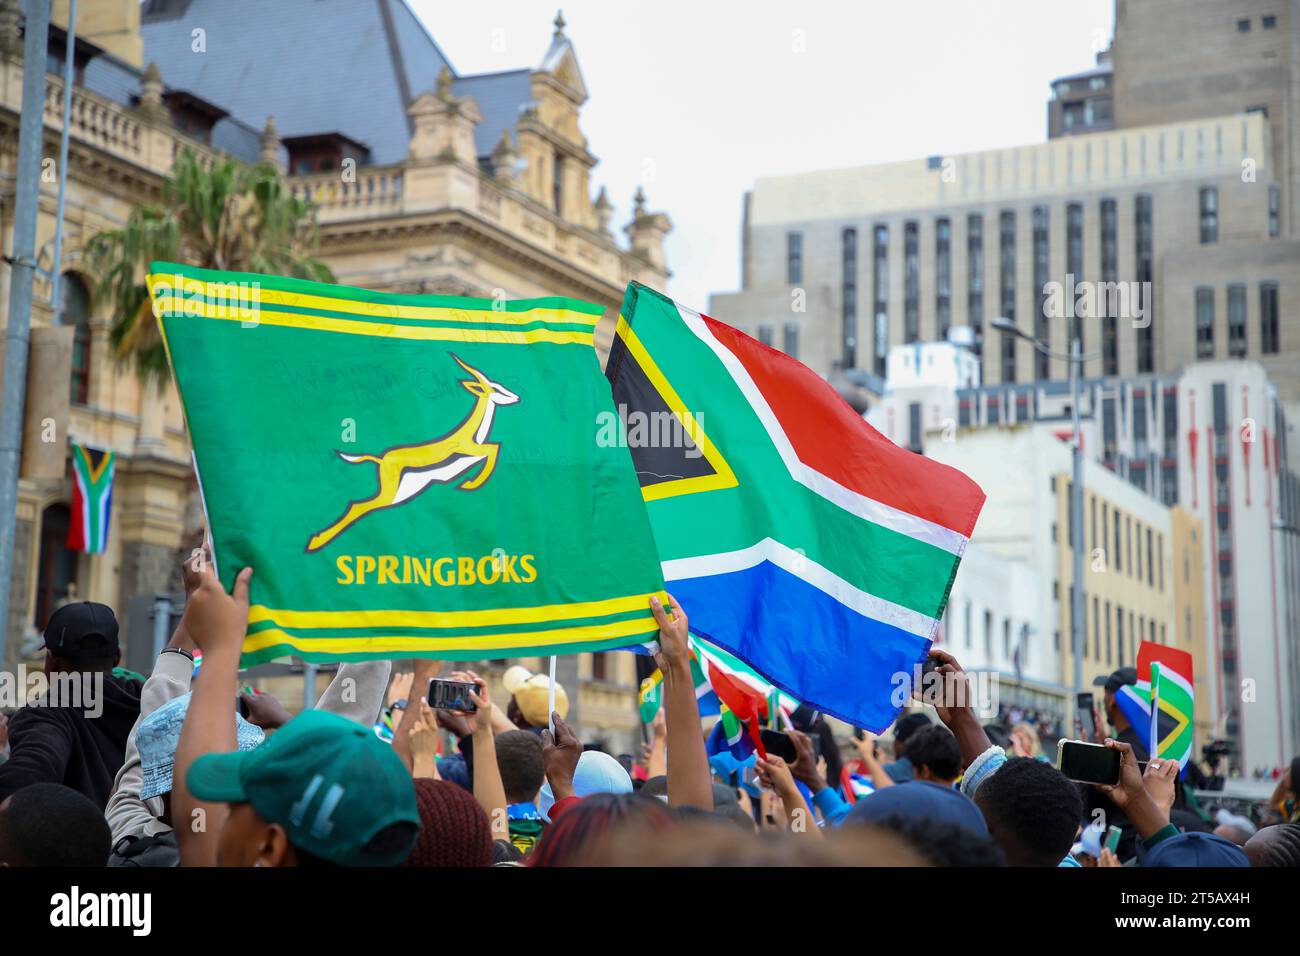 CAPE TOWN, SOUTH AFRICA - NOVEMBER 03: fans wave a springbok flag and South African flag in front of the City Hall during the Springbok Trophy tour in Cape Town on November 03, 2023 in Cape Town, South Africa. The Springboks beat the New Zealand All Blacks 12-11 to win the Rugby World Cup in Paris, France on Saturday 28 October 2023. (Photo by Roger Sedres) Stock Photo